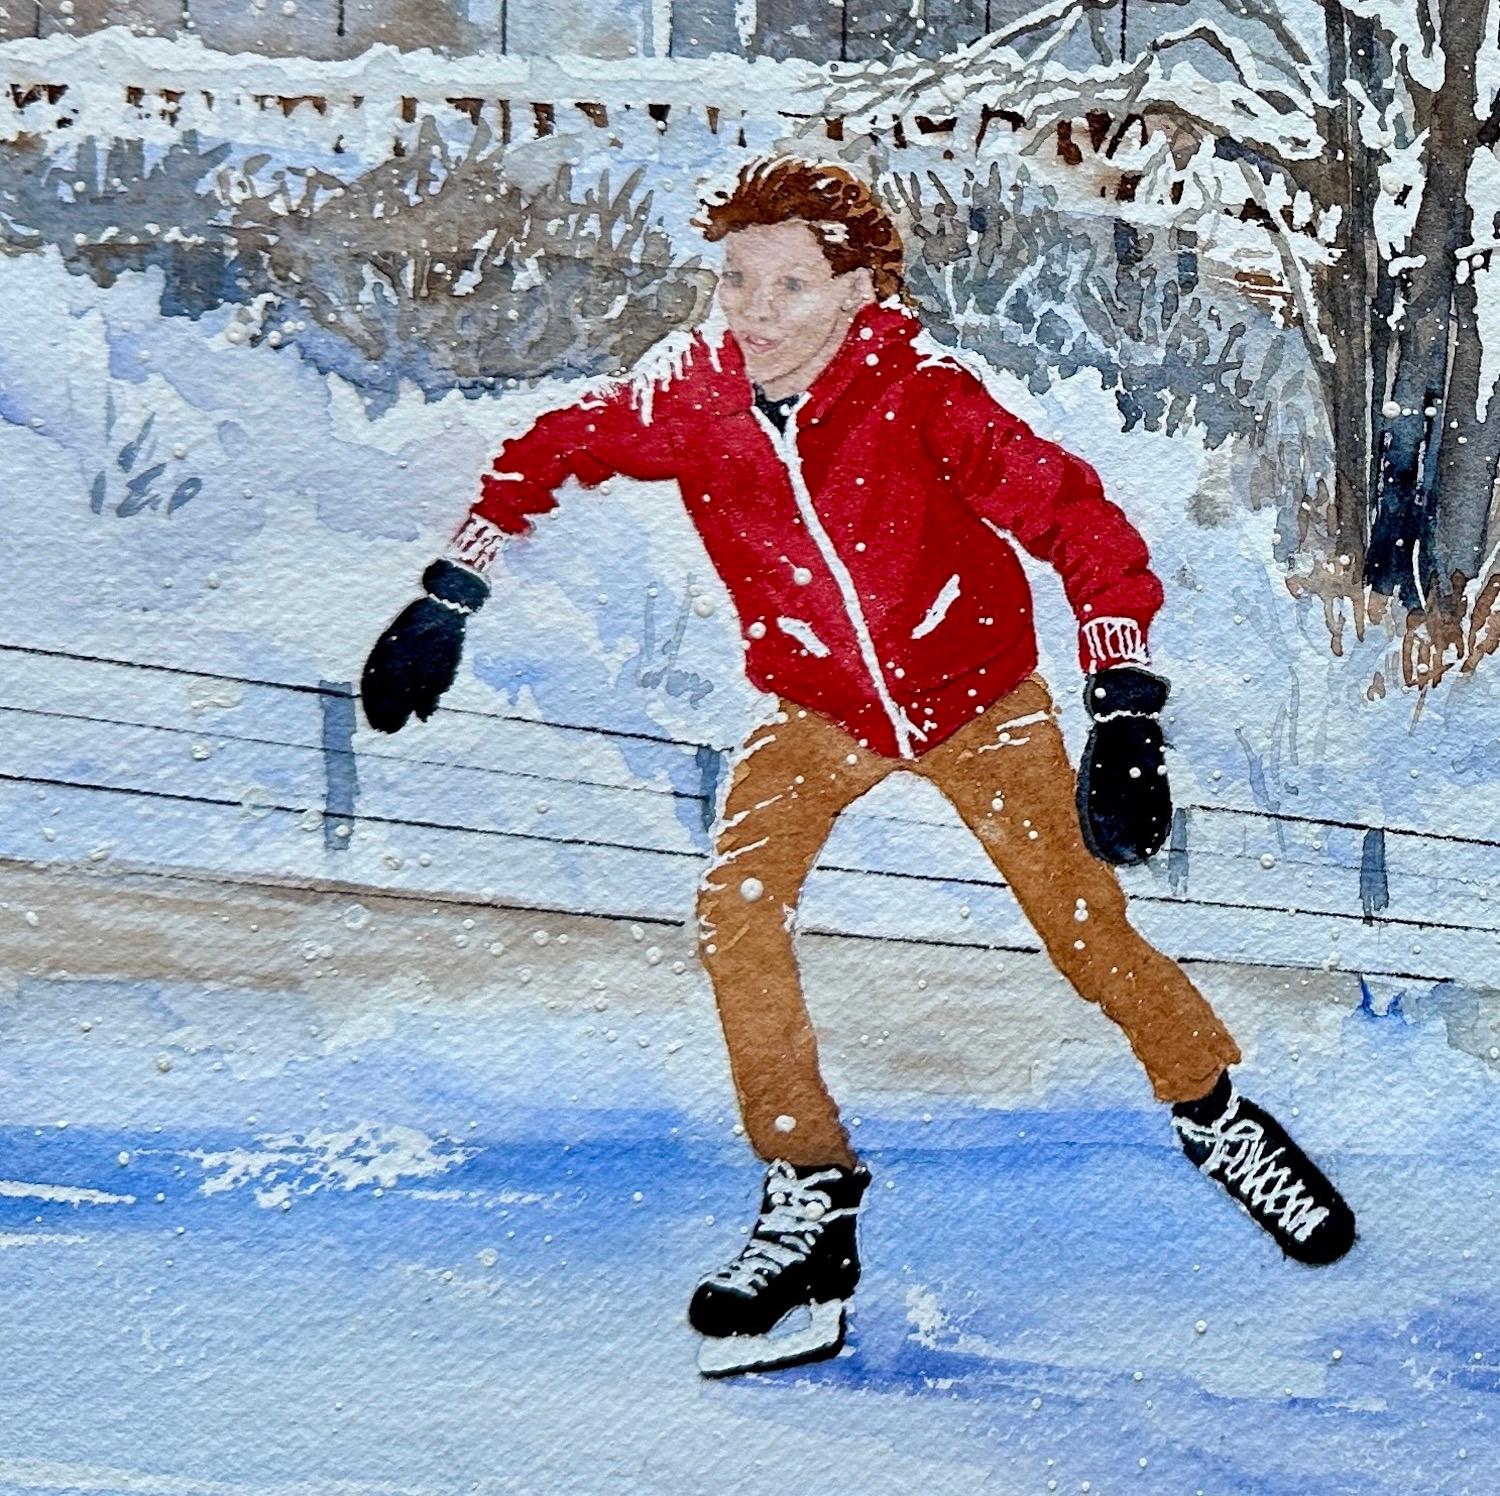 <p>Artist Comments<br>This watercolor painting captures the joyful experience of skating on the Rideau Canal in Canada, with children twirling on skates and laughter filling the air. But what's that irresistible aroma drawing their attention? It's